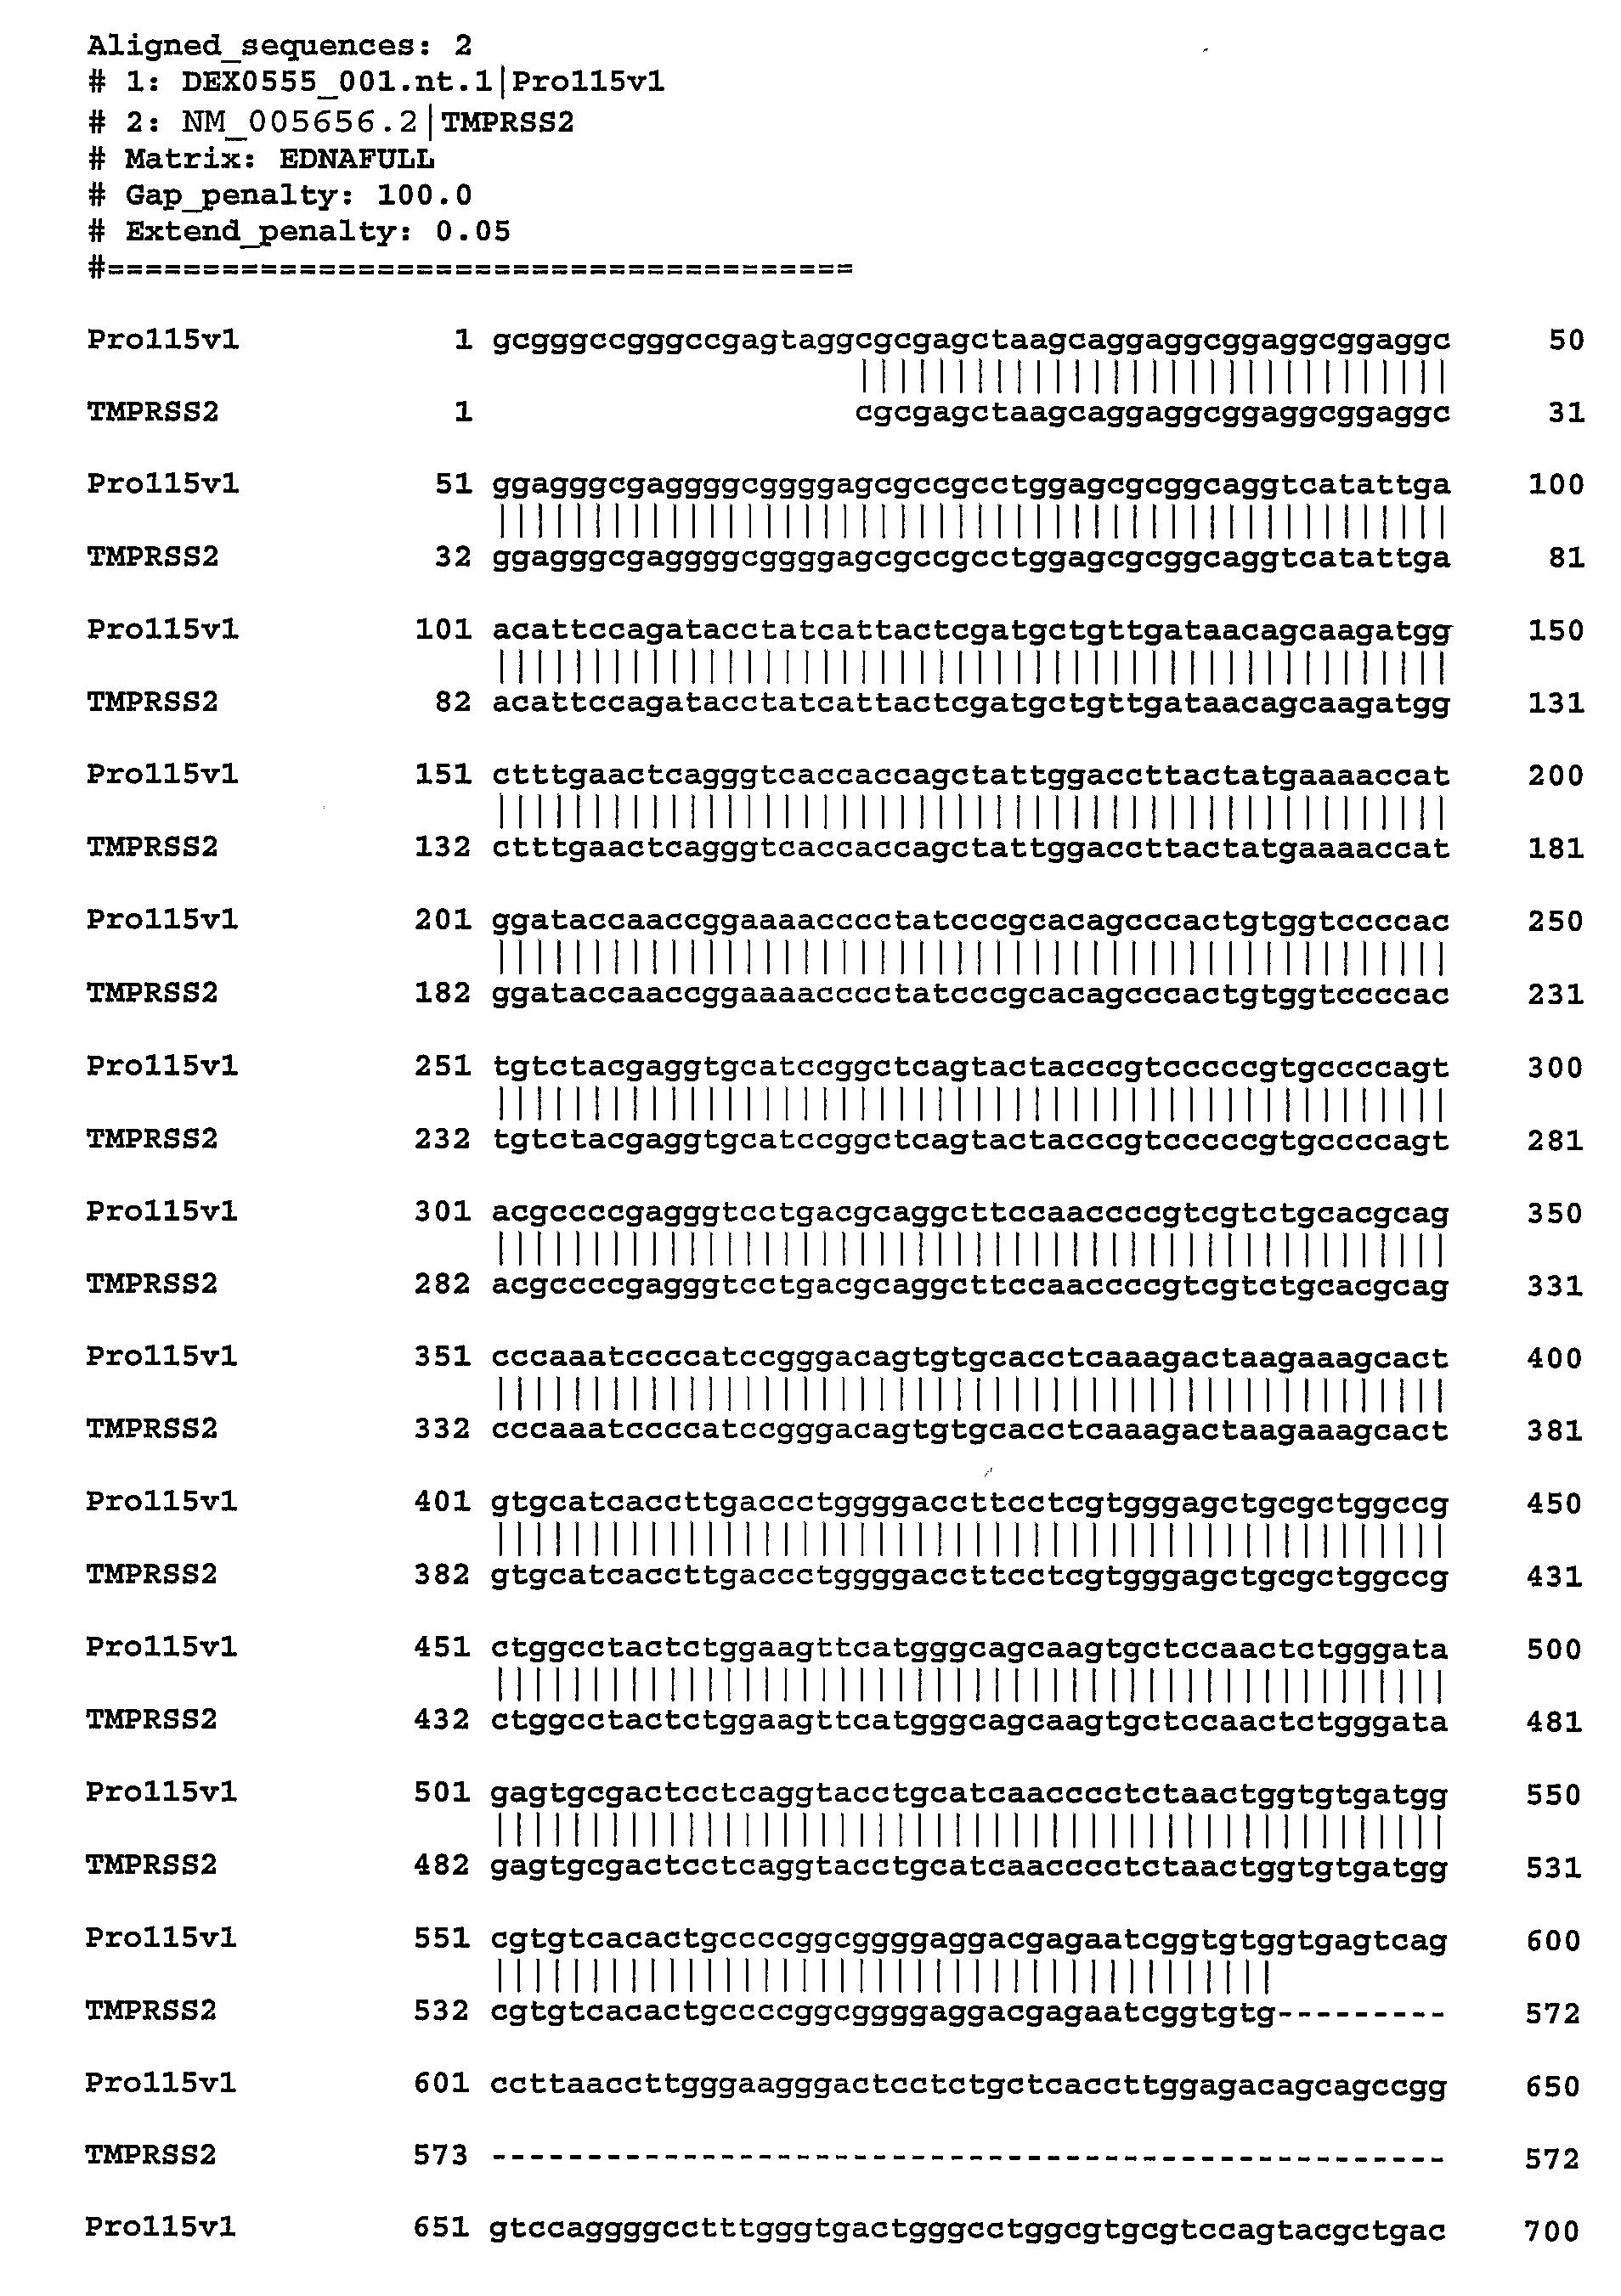 Compositions, Splice Variants and Methods Relating to Cancer Specific Genes and Proteins